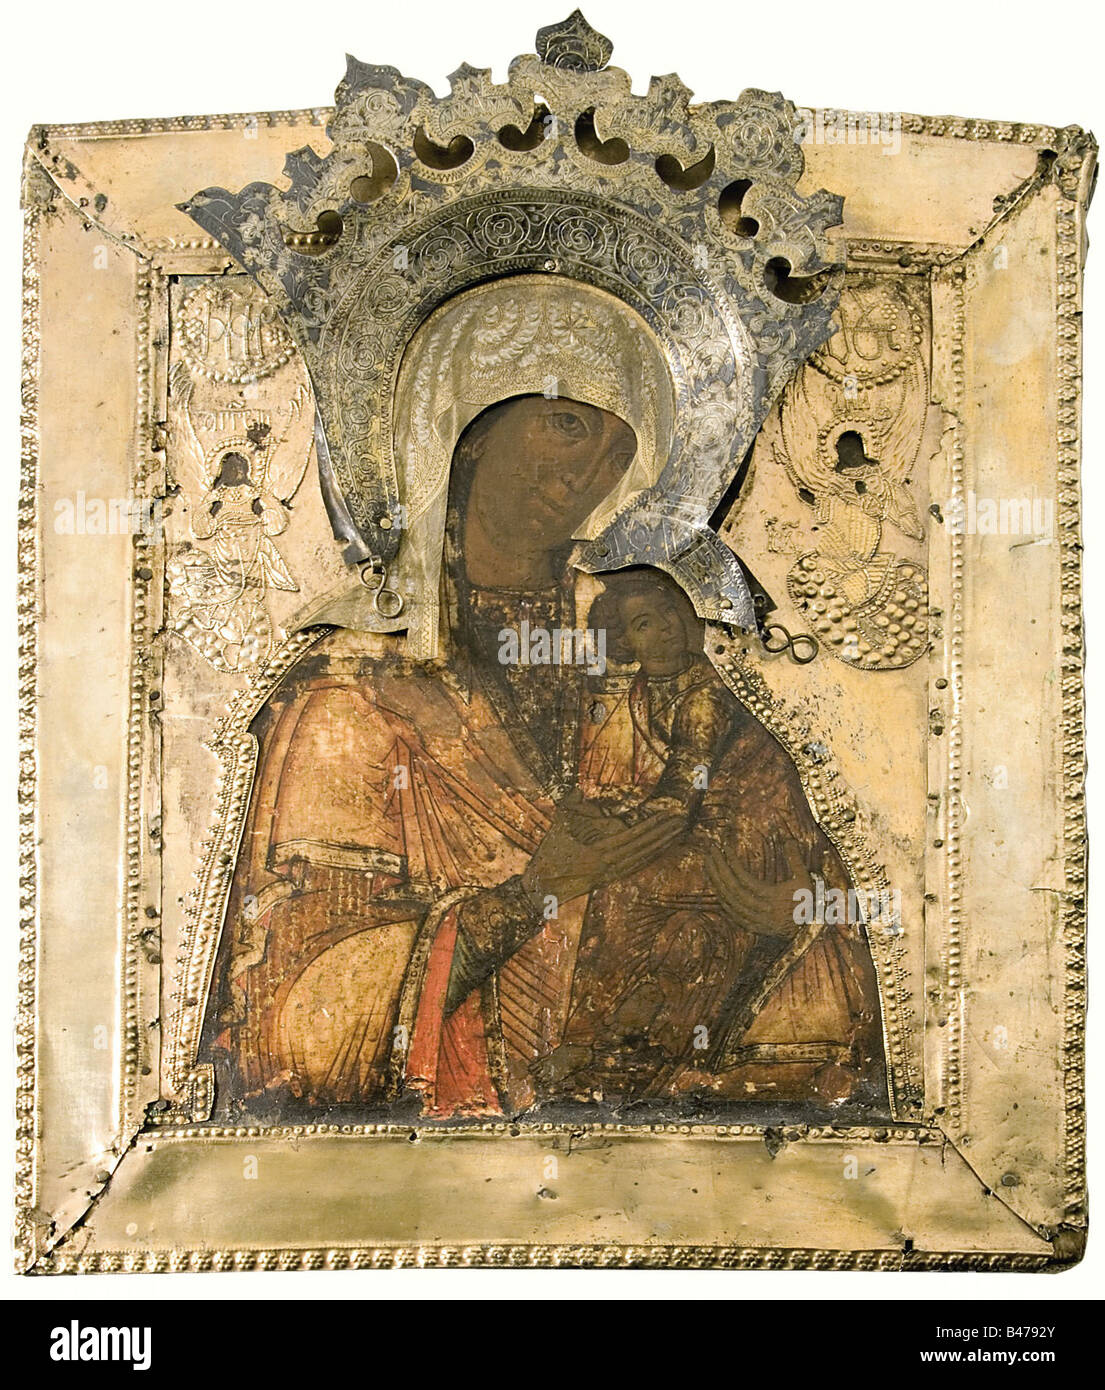 A Russian icon, first third of the 19th century. Egg tempera on wood. Portrayal of the Mother of God with Christ Child. Oclad of fire-gilded copper (partially damaged), fine engraving of the Virgin Mary's crown. On the reverse side a handwritten gift dedication, dated 1831. Size 32 x 27 cm. fine arts, people, 19th century, fine arts, art, painting, paintings, object, objects, stills, clipping, clippings, cut out, cut-out, cut-outs, Artist's Copyright has not to be cleared Stock Photo